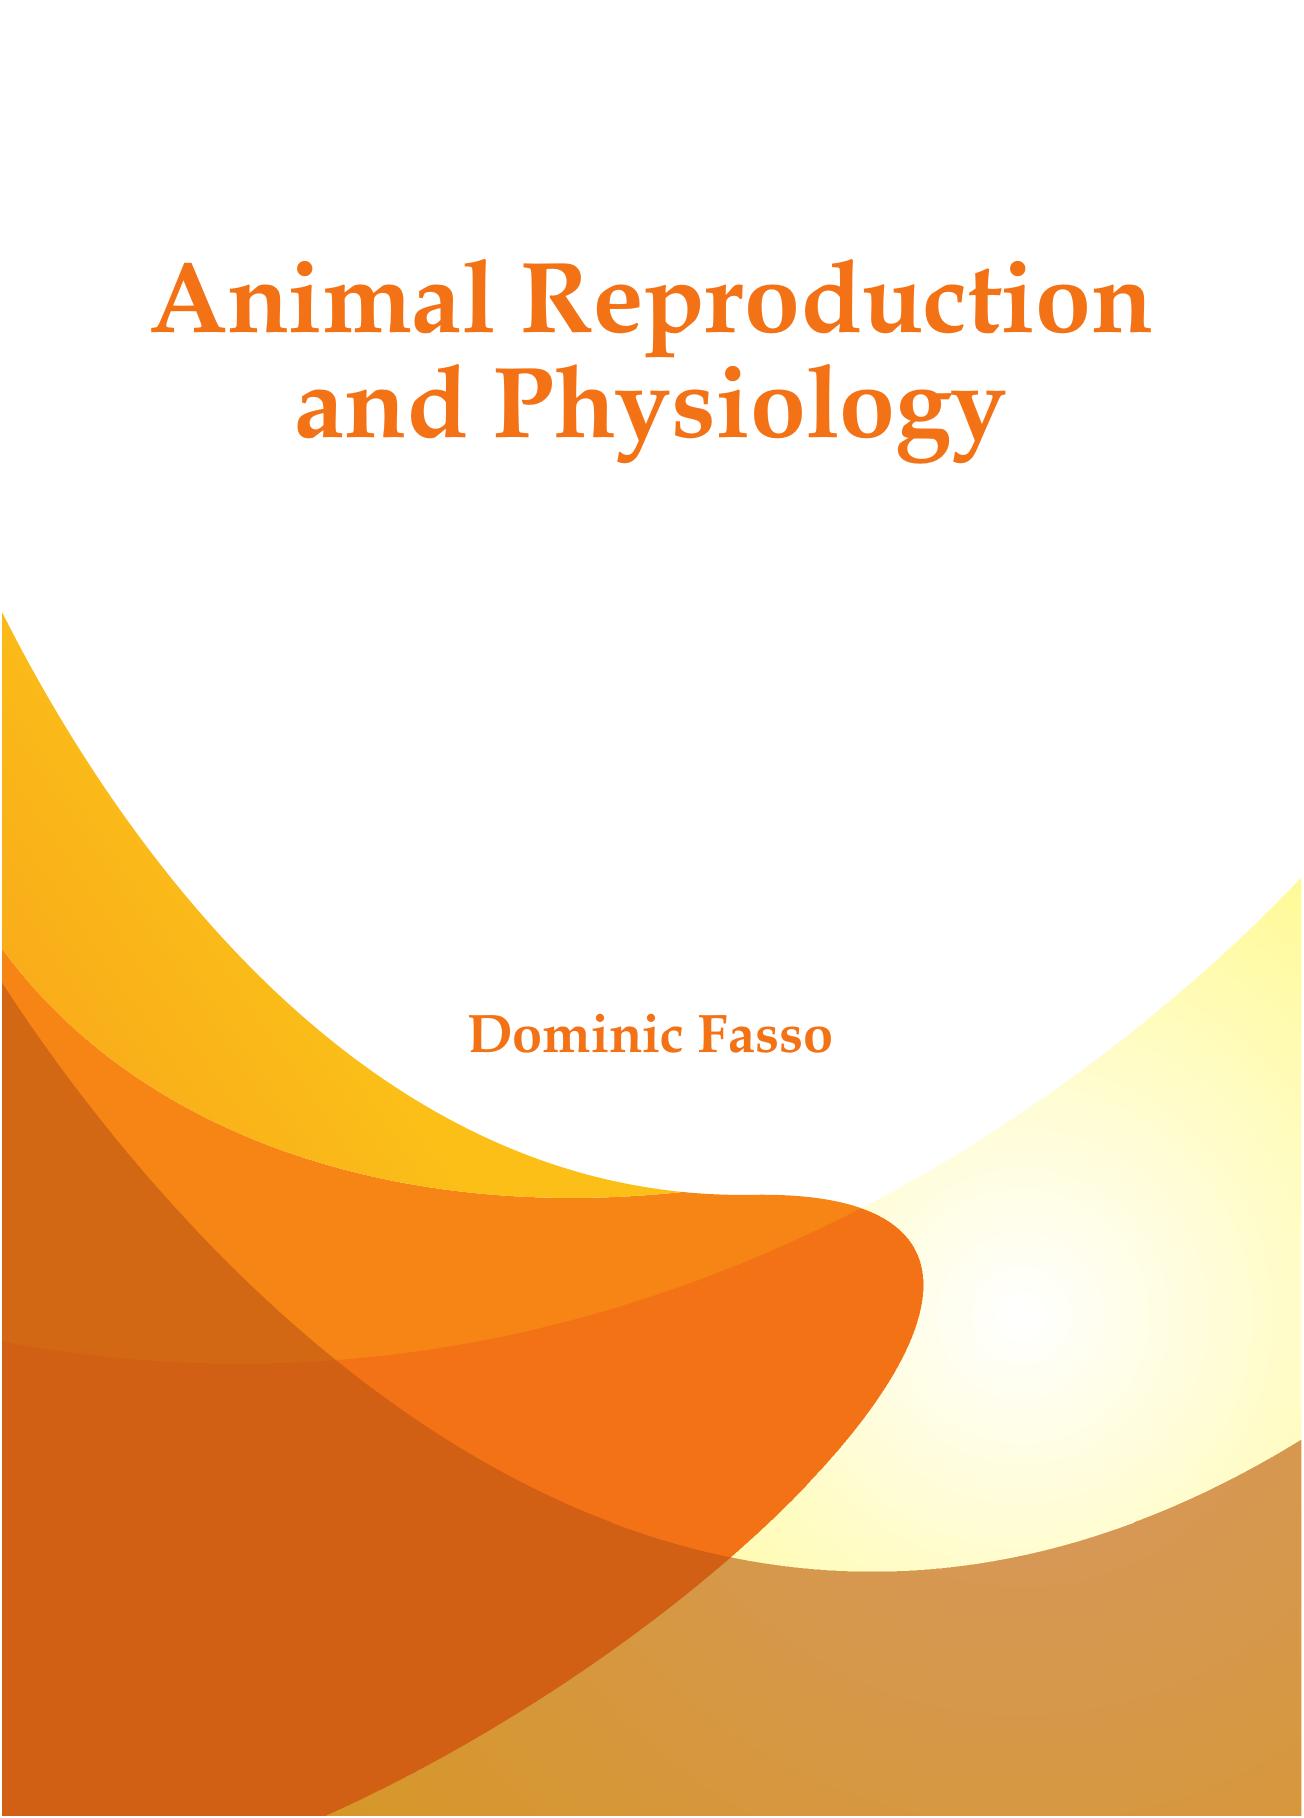 Animal Reproduction and Physiology 2017